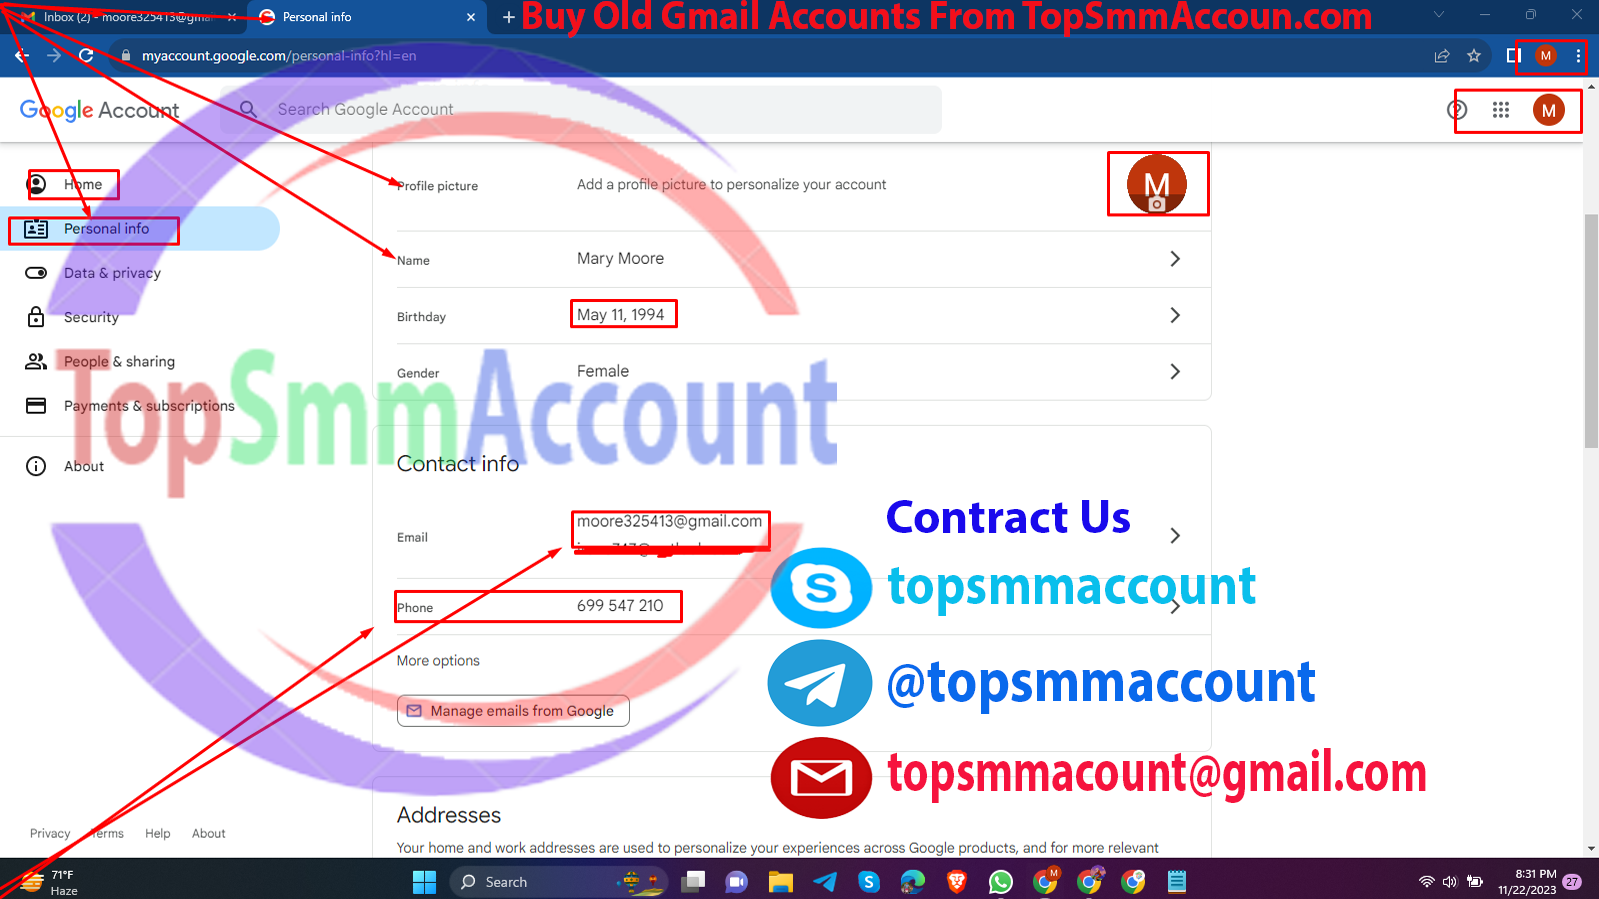 buy old gmail accounts from topsmmaccount.com